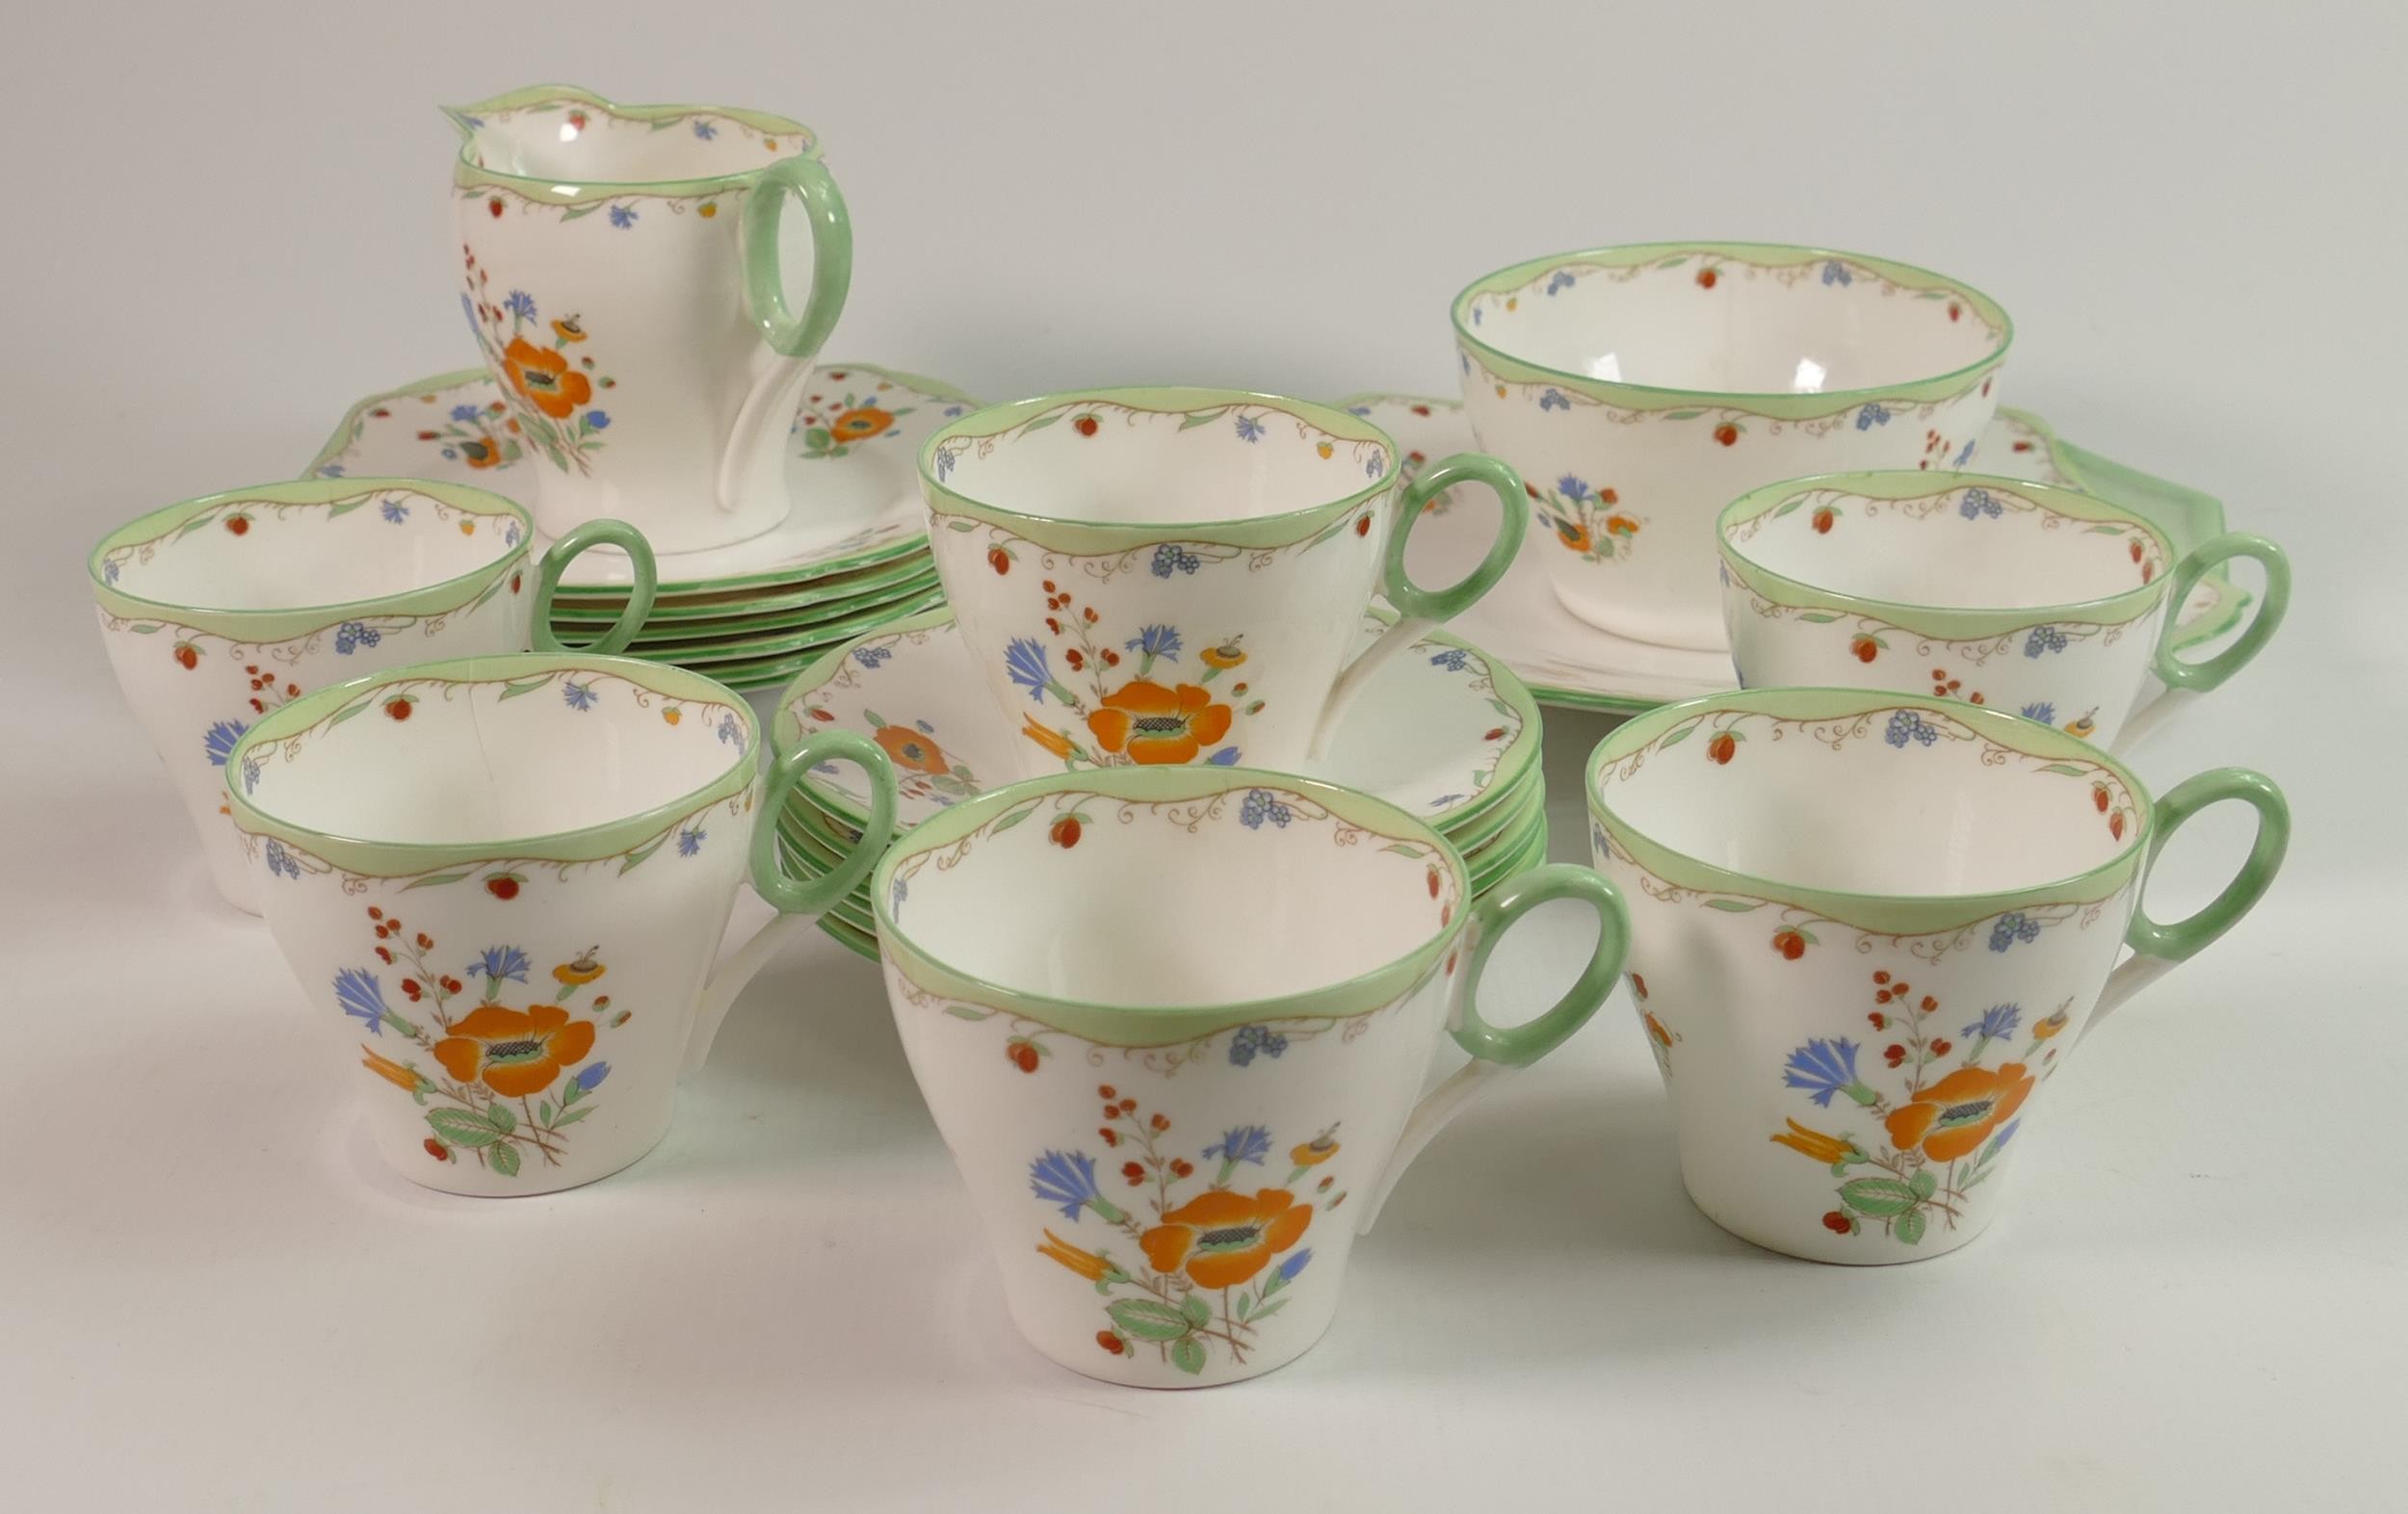 Shelley China tea set in the Posies Spray 12576 design, hairline cracks to one side plate, one